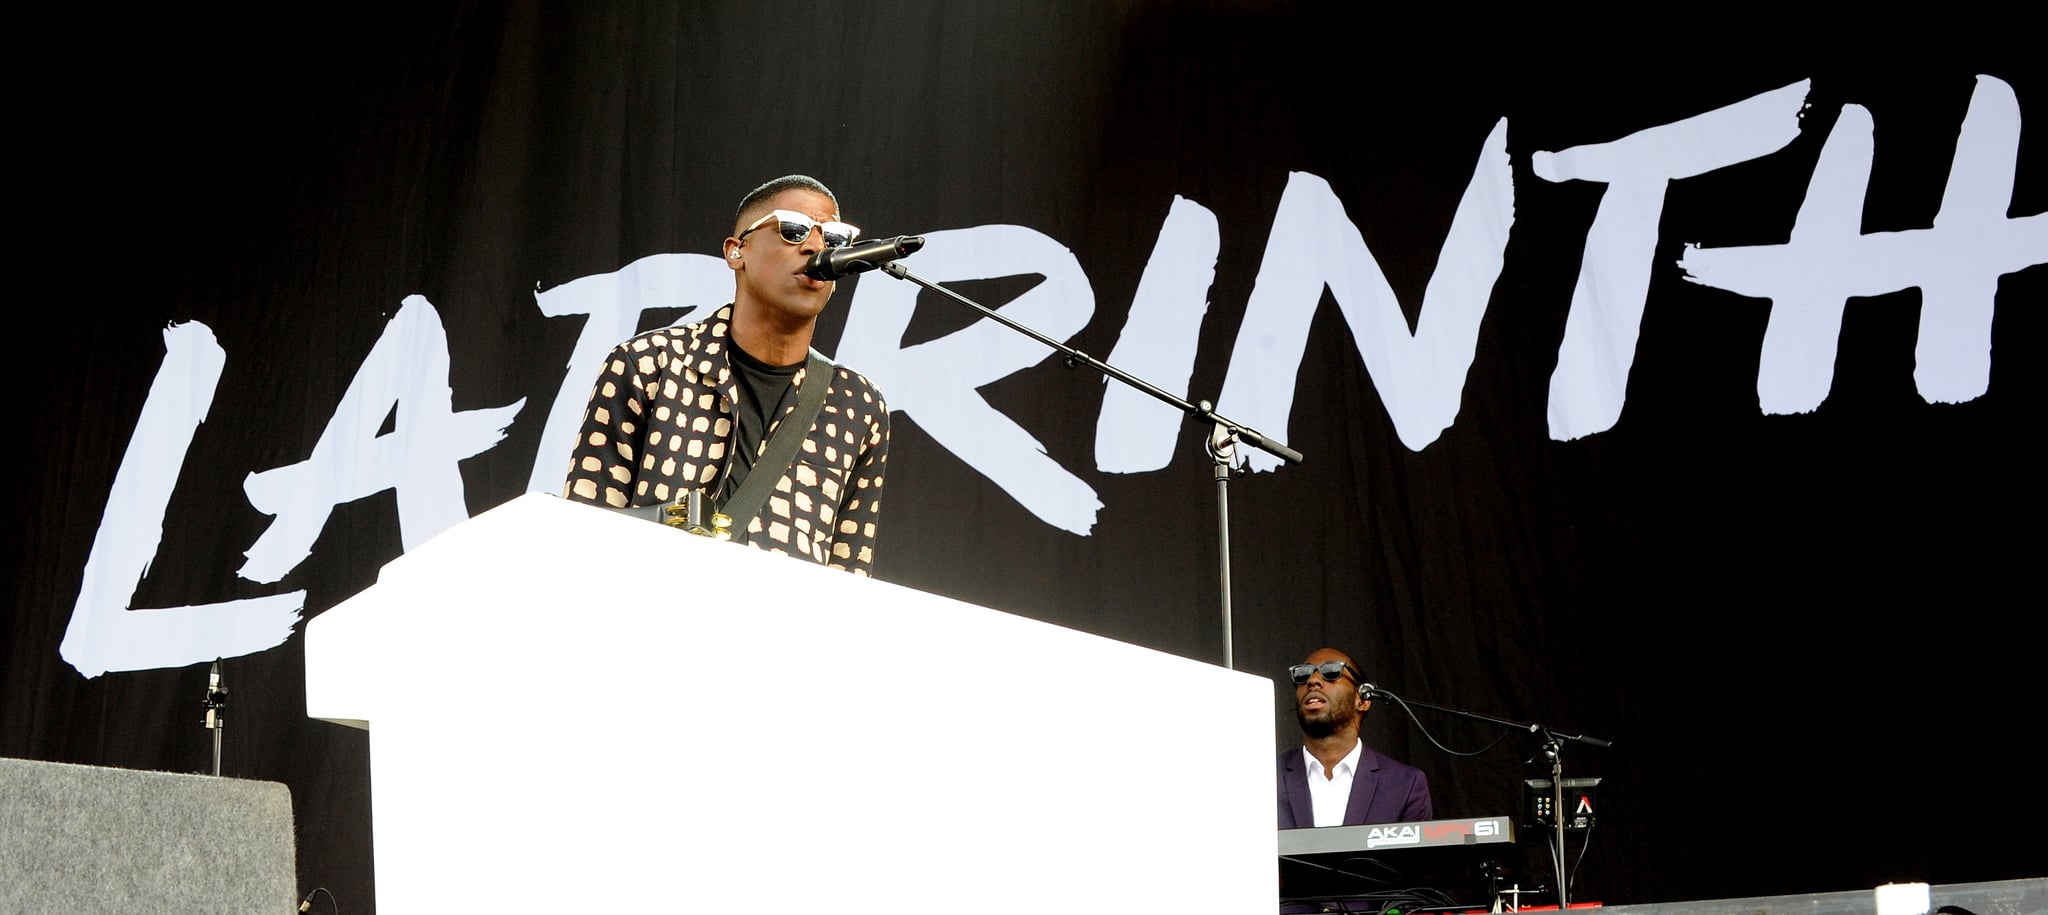 STAFFORD, ENGLAND - AUGUST 23:  Labrinth performs on Day 2 of the V Festival at Weston Park on August 23, 2015 in Stafford, England.  (Photo by Shirlaine Forrest/WireImage)